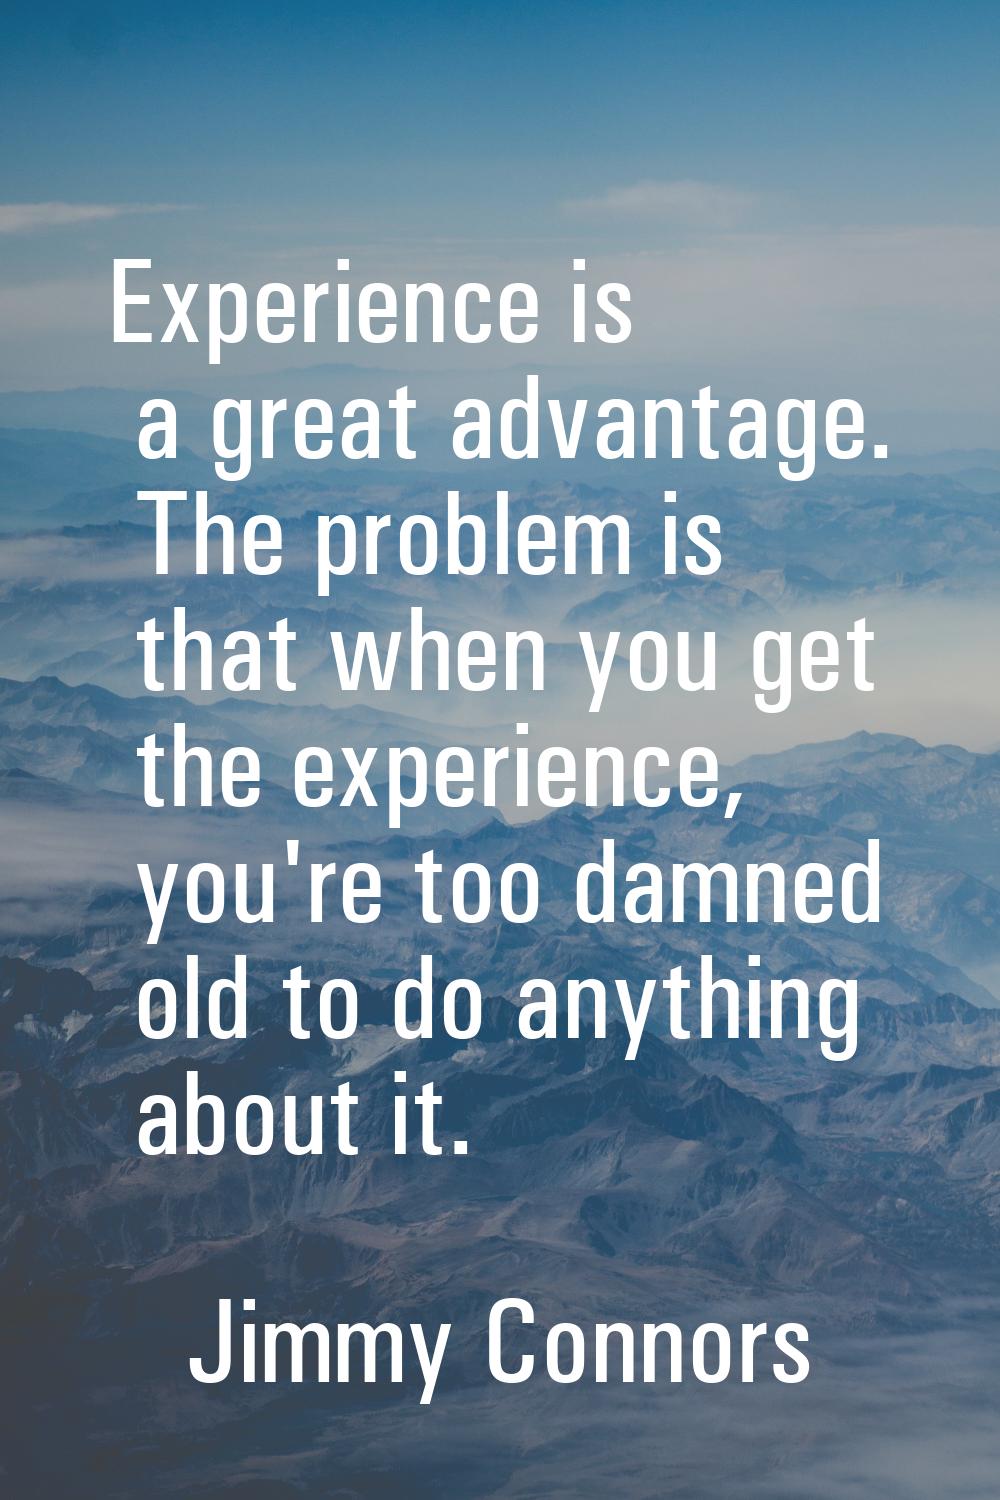 Experience is a great advantage. The problem is that when you get the experience, you're too damned